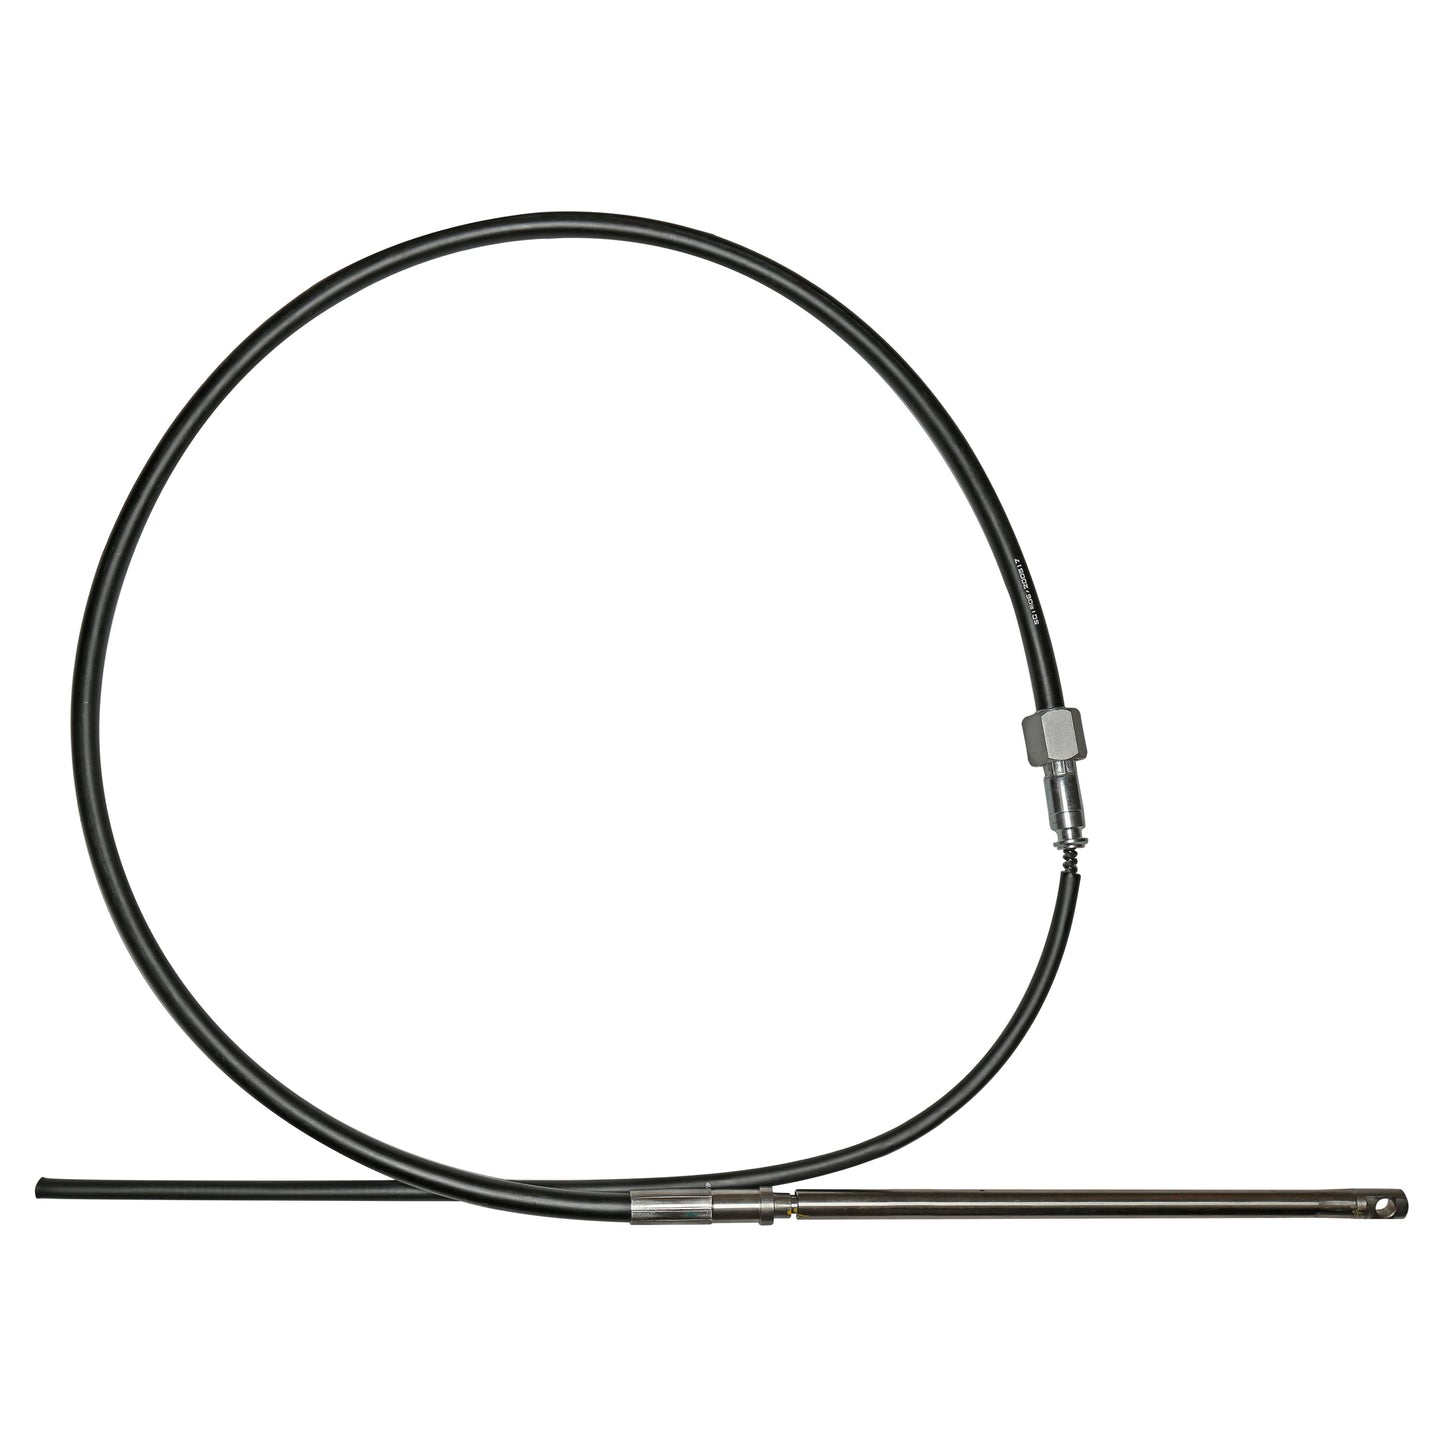 Steering Cable - 8 inch stroke x 6 foot long – for use with Remote Drive Unit - shop.cmpgroup.net